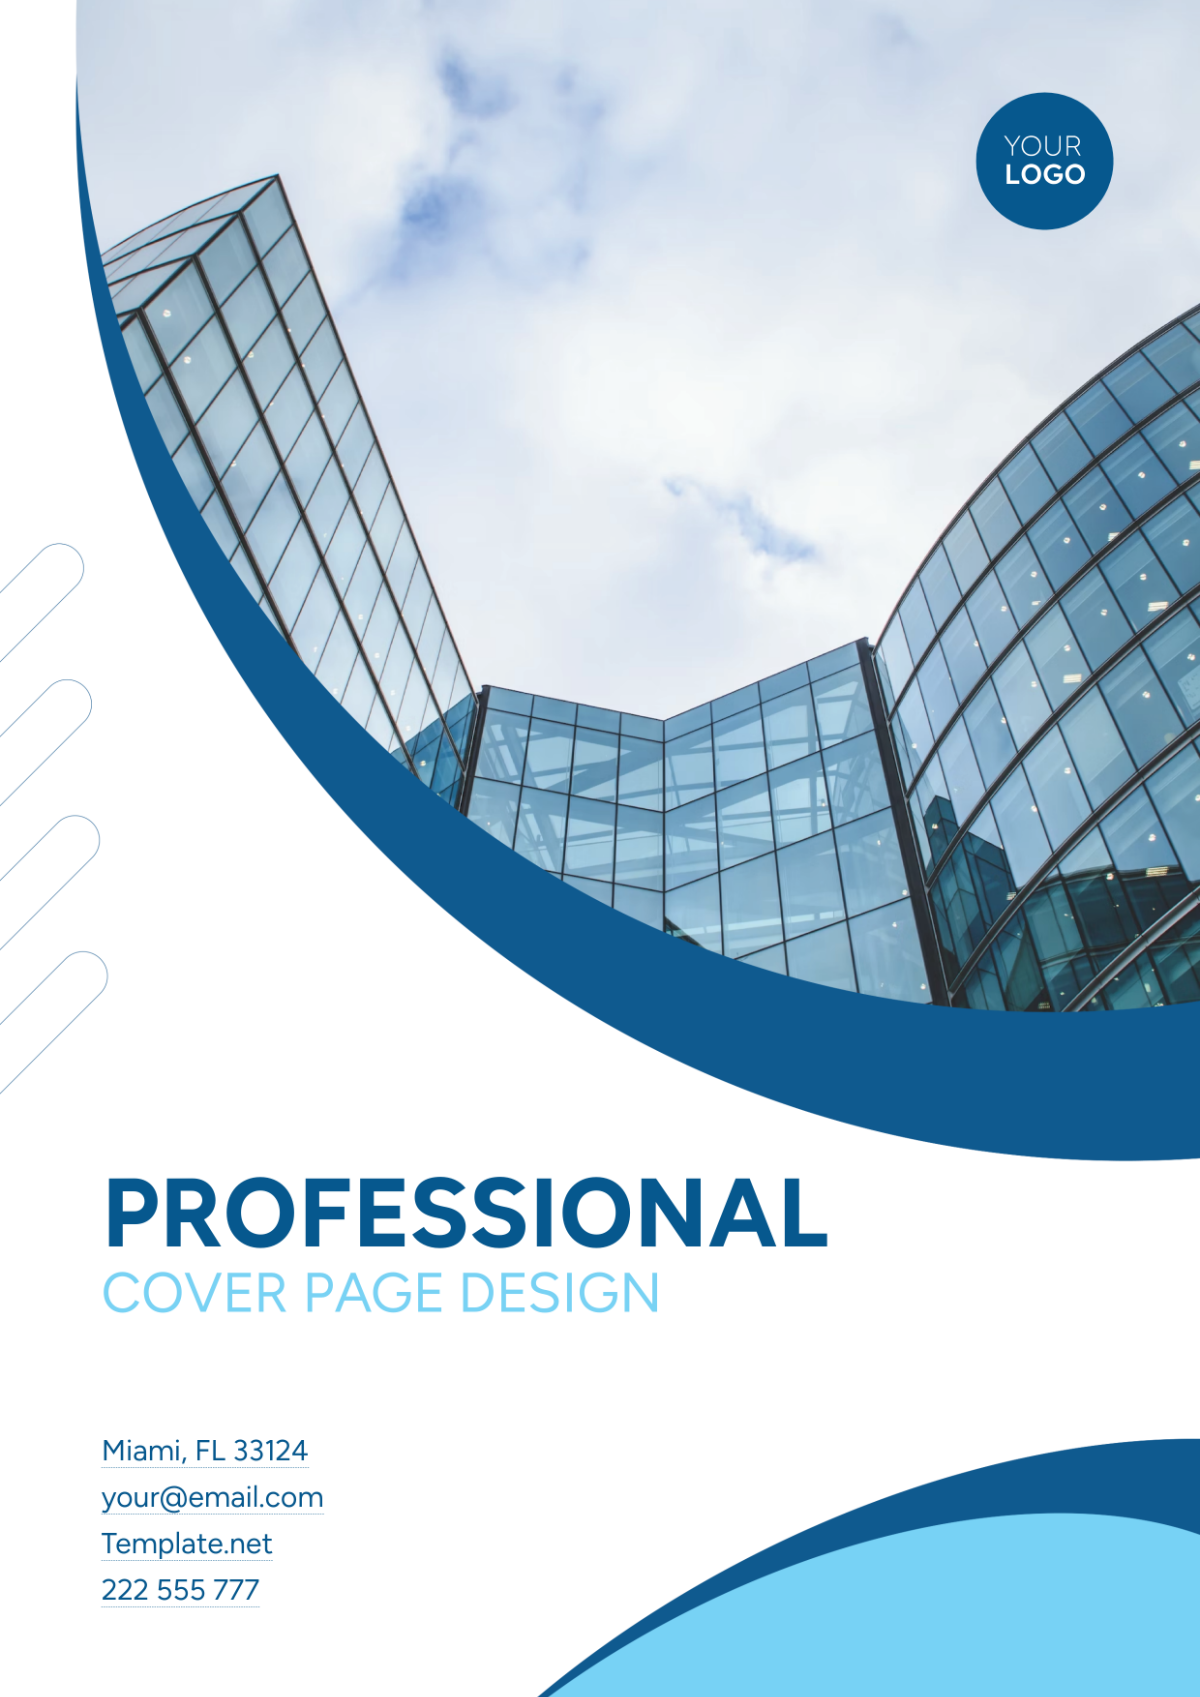 Professional Cover Page Design Template